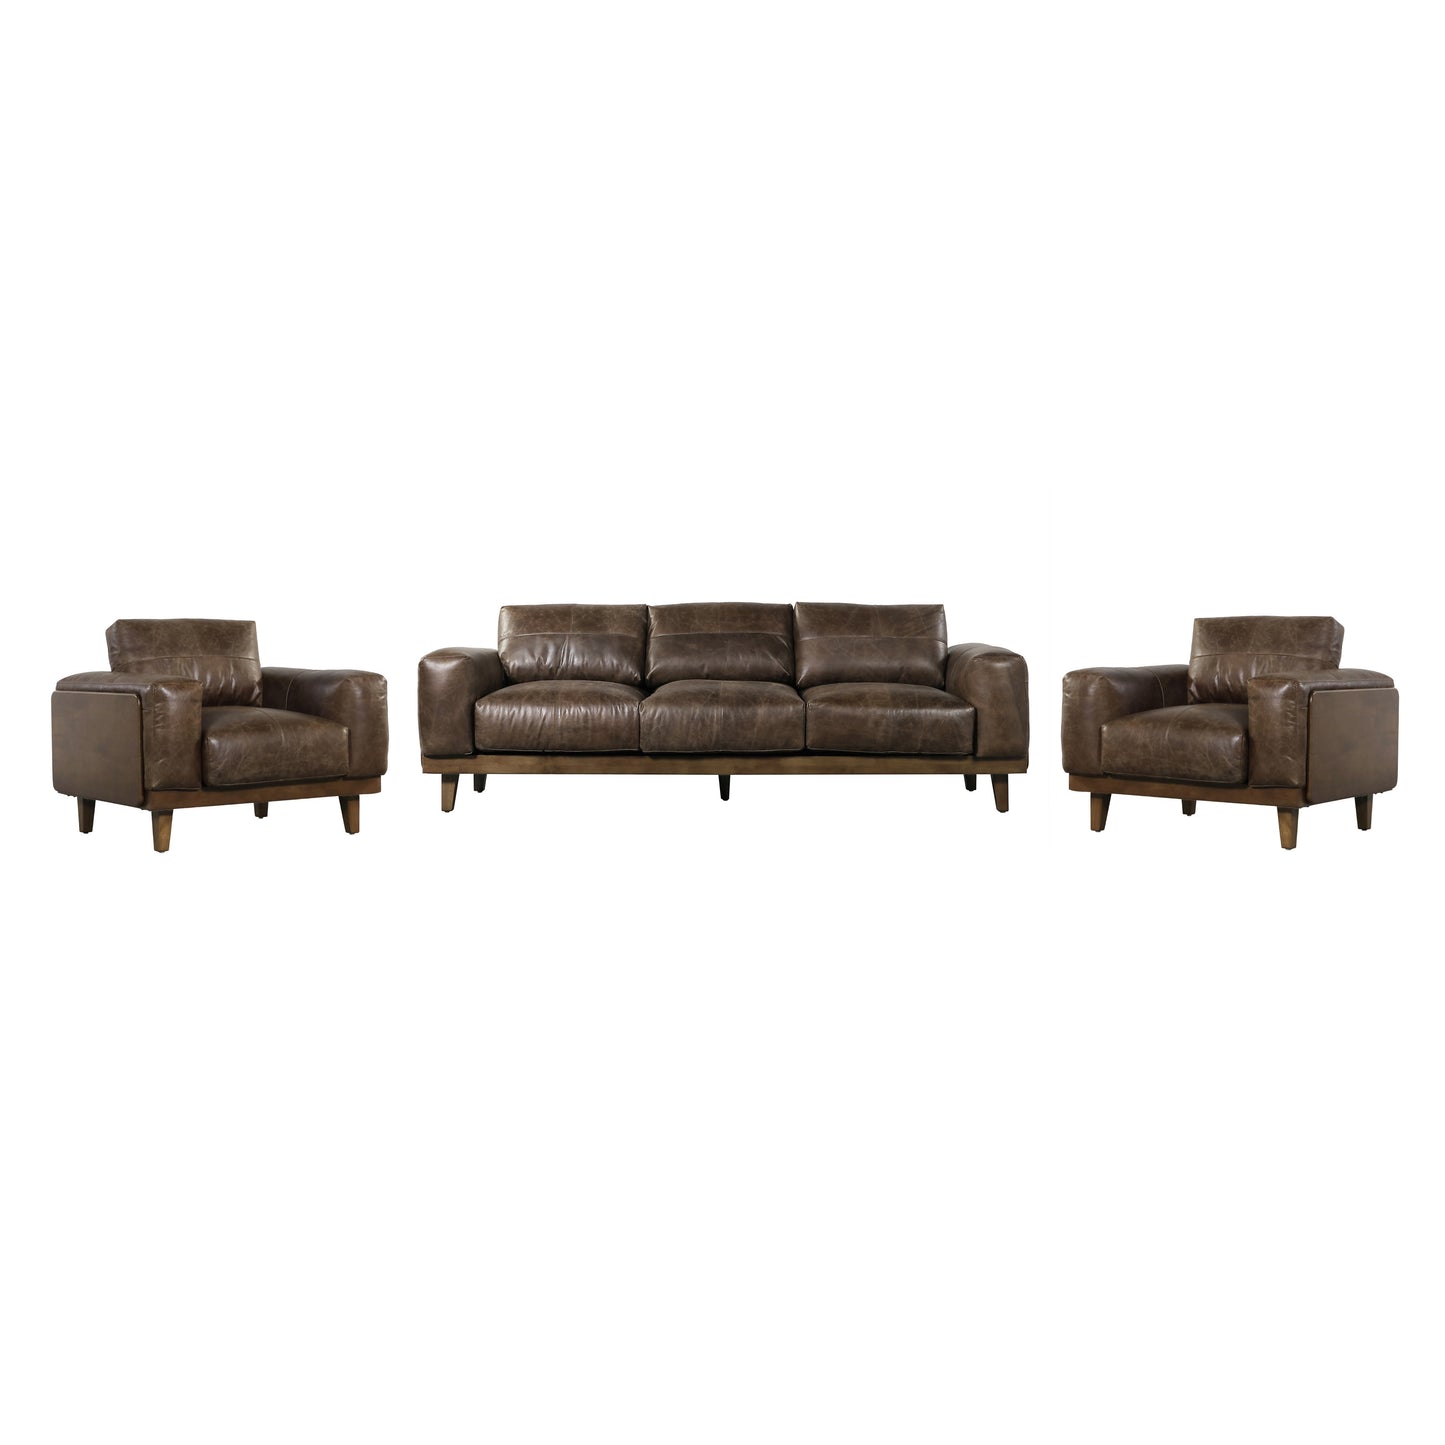 Connor Contemporary Upholstered 3 Piece Oversized Living Room Sofa Set